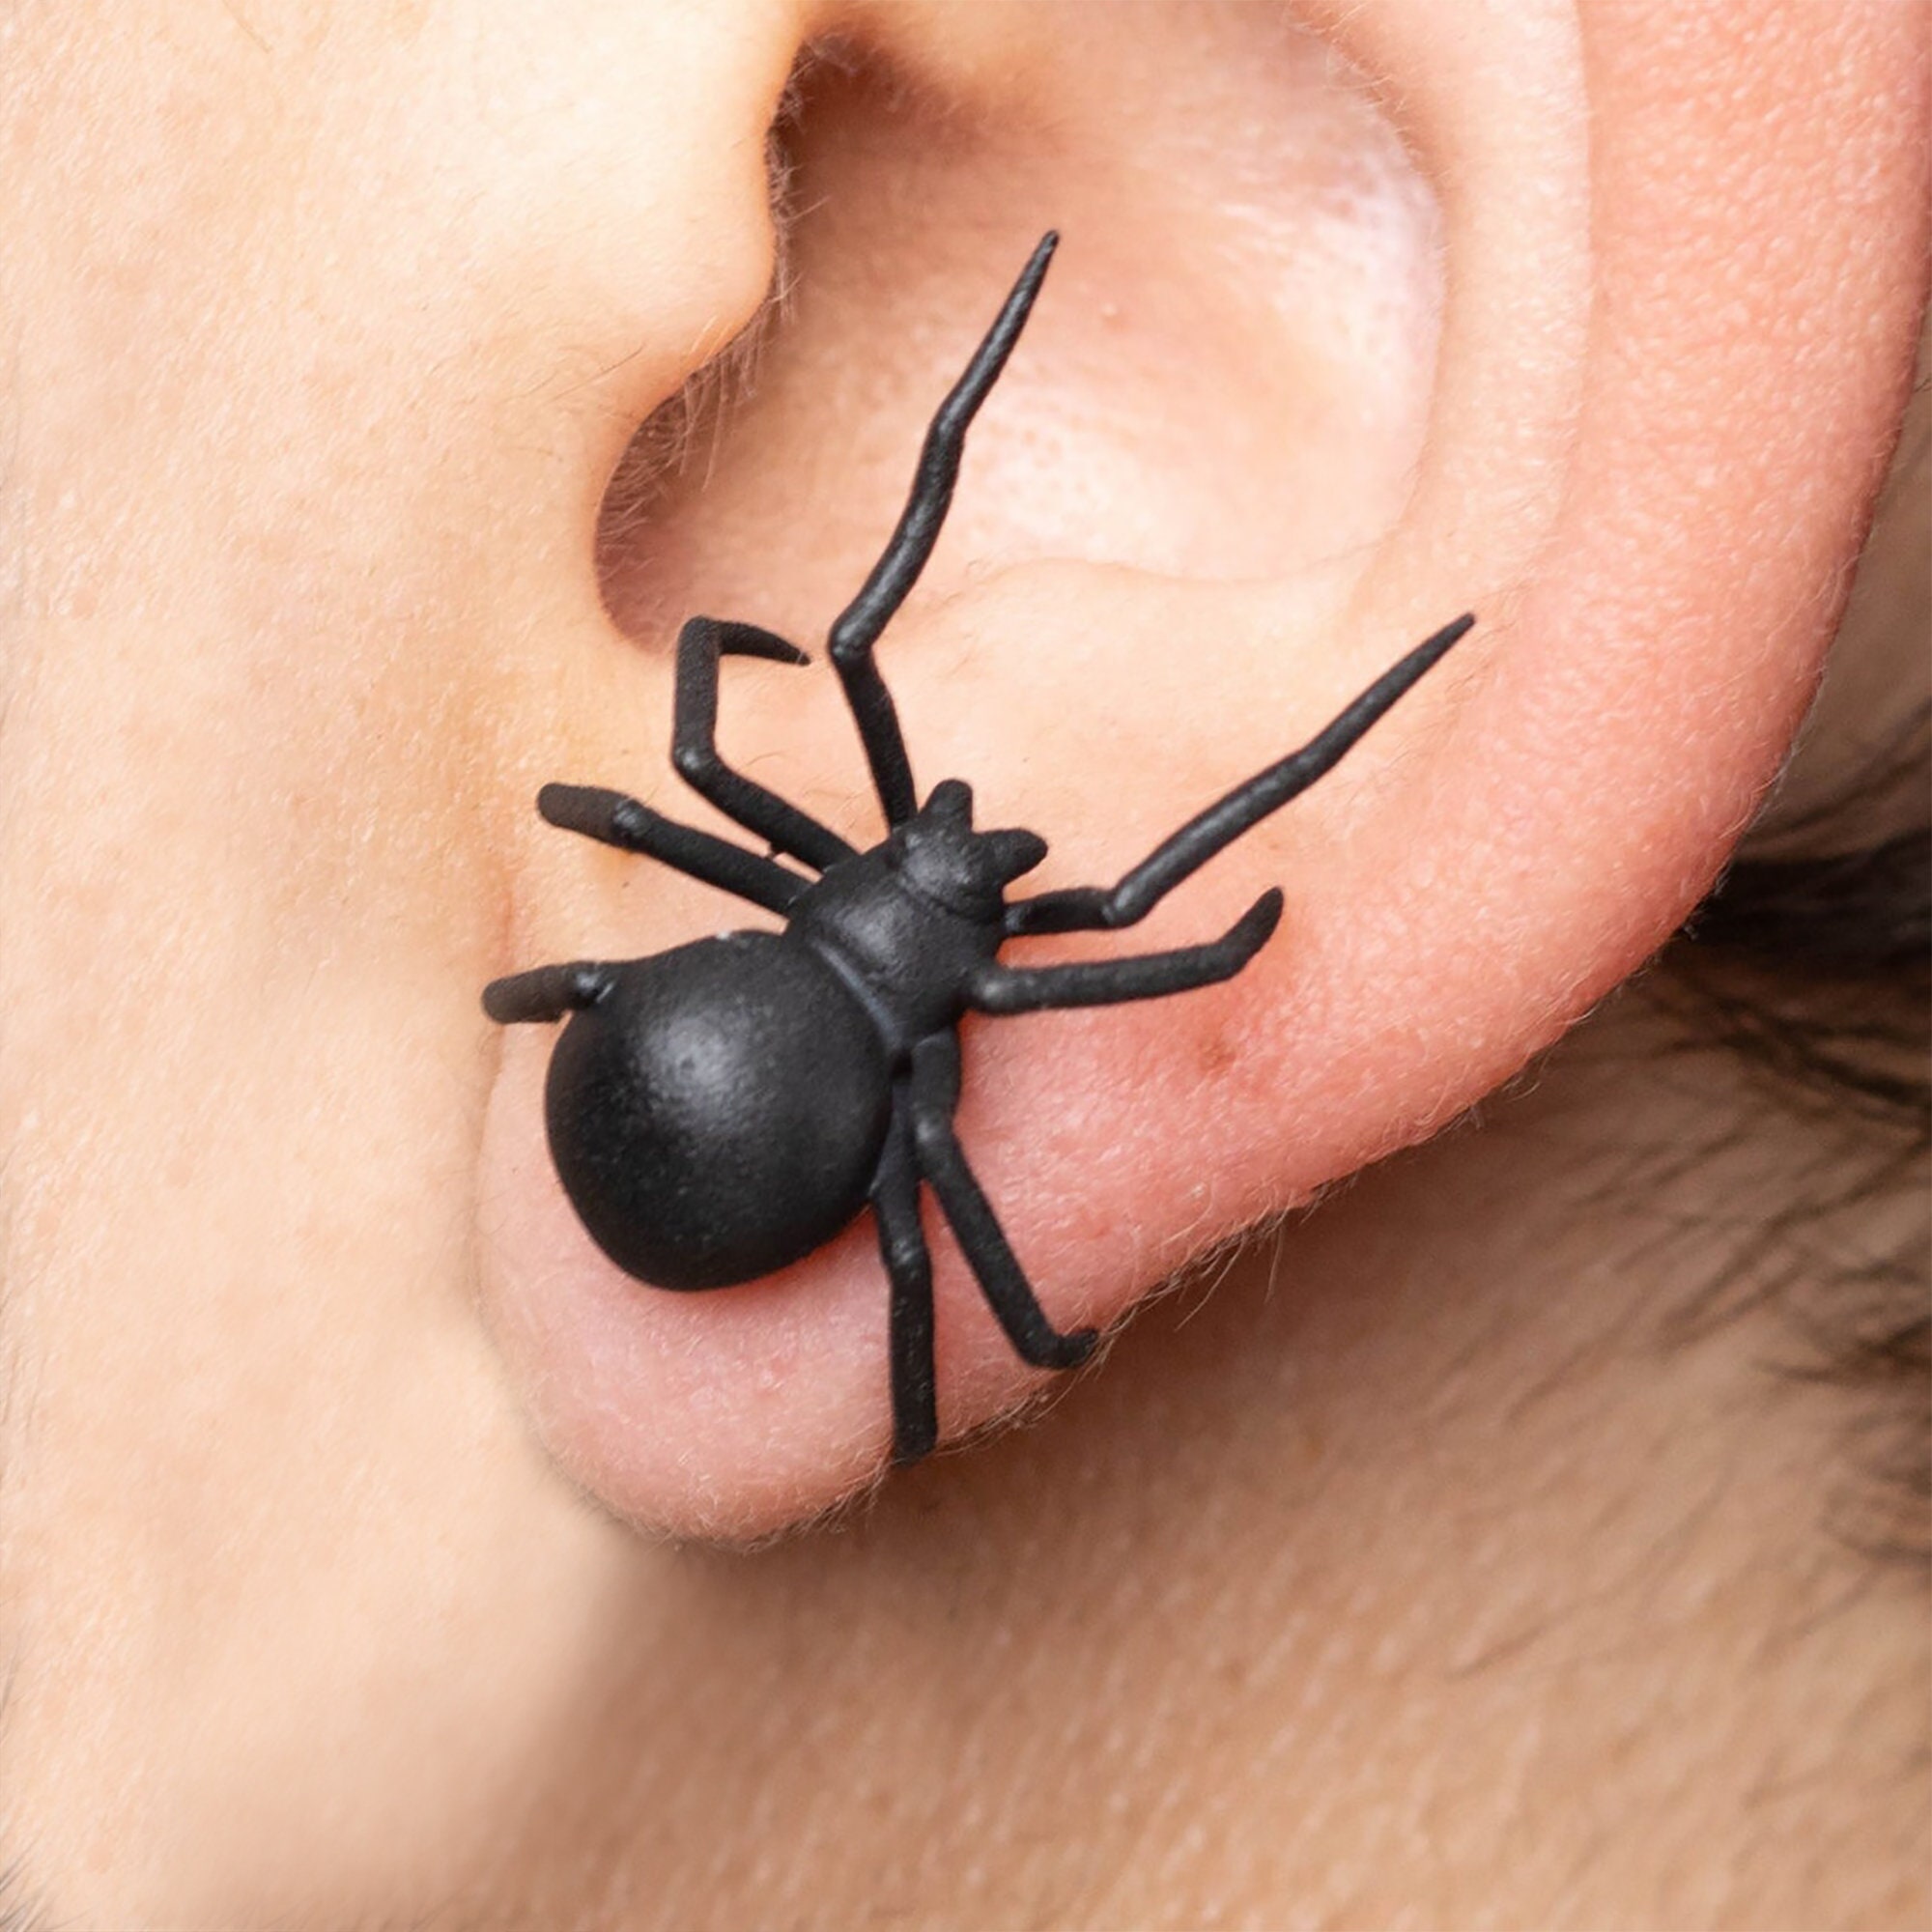 Black Widow Spider Earrings Hand-painted 3D Printed Quirky Funny